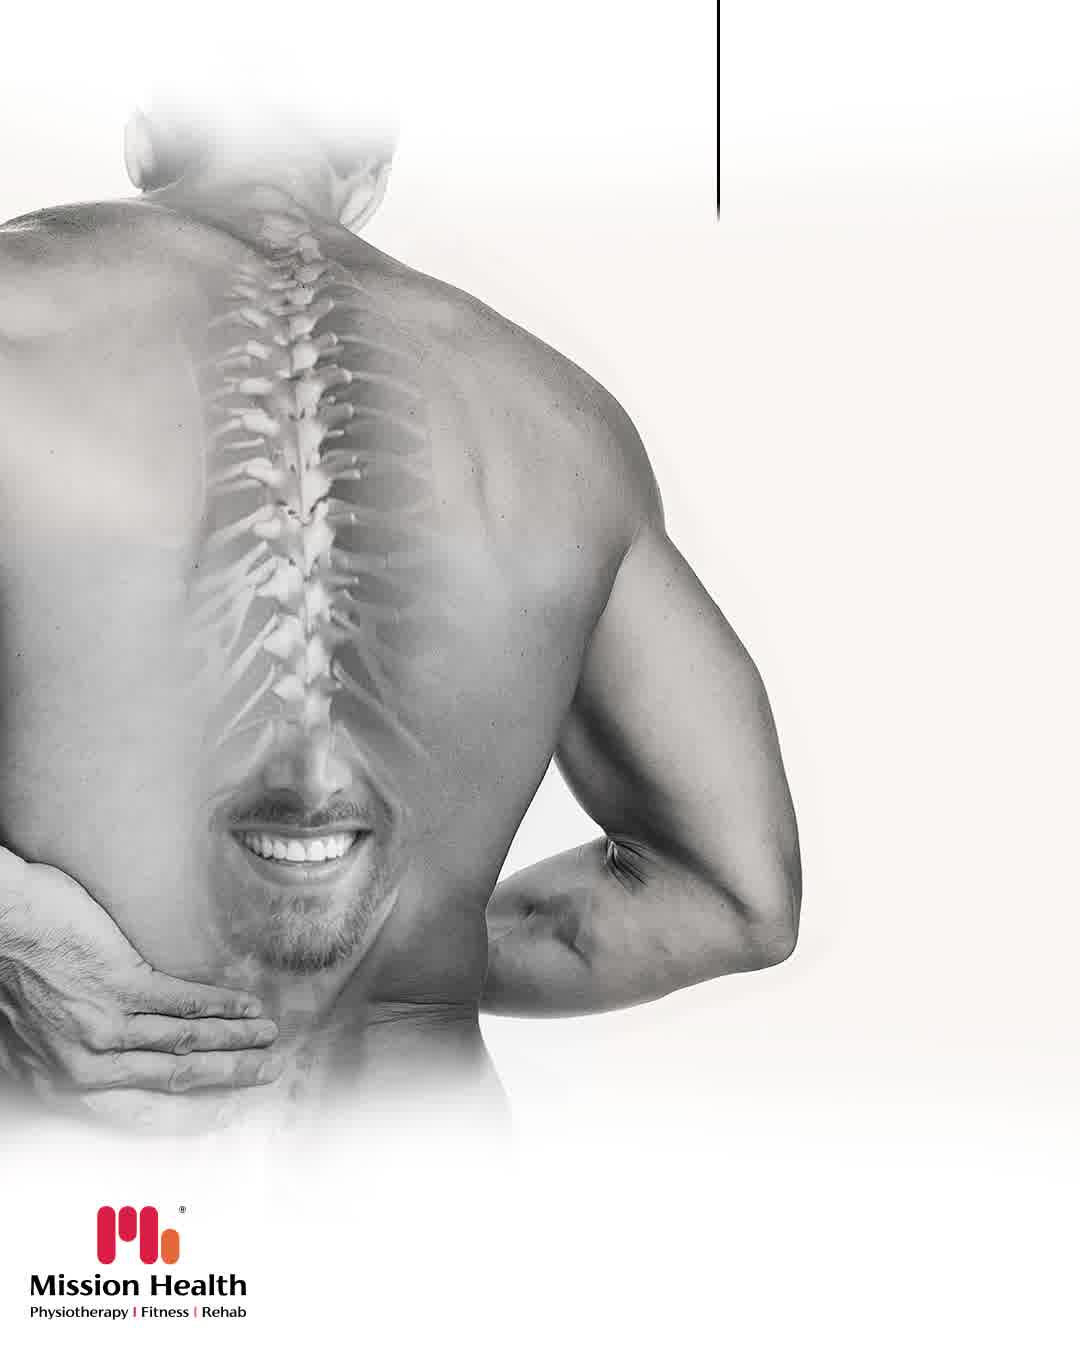 In majority of the people, slipped discs are the result of wear and tear. Over the years, the spinal discs tend to lose their elasticity, hence the fluid gets leaked out and they become brittle and cracked. These changes are a normal part of the aging process but it greatly varies from person to person. 
The worst part about the problem is that the herniated disk or the slip disk happens without giving any prior notions of its occurrence. 

Not every disc requires intervention but about 2-5% of the slip disc do require the intervention & ailment. 
Although it is a serious health disorder that brings a lot of lifestyle changes; 95-98% of Slip Disc can be cured and reversed with right physiotherapy treatment. 
Sympathy cannot reverse slip disk but the right treatment CAN. 
Consult our Super speciality Spine clinic to get your slipped disc reversed.

Mission Health Helpline Number: +916356263562

www.missionhealth.co.in

#SlippedDisc #SpineSpecialist #MissionHealth #Fitness #PersonalTraining #MovementIsLife